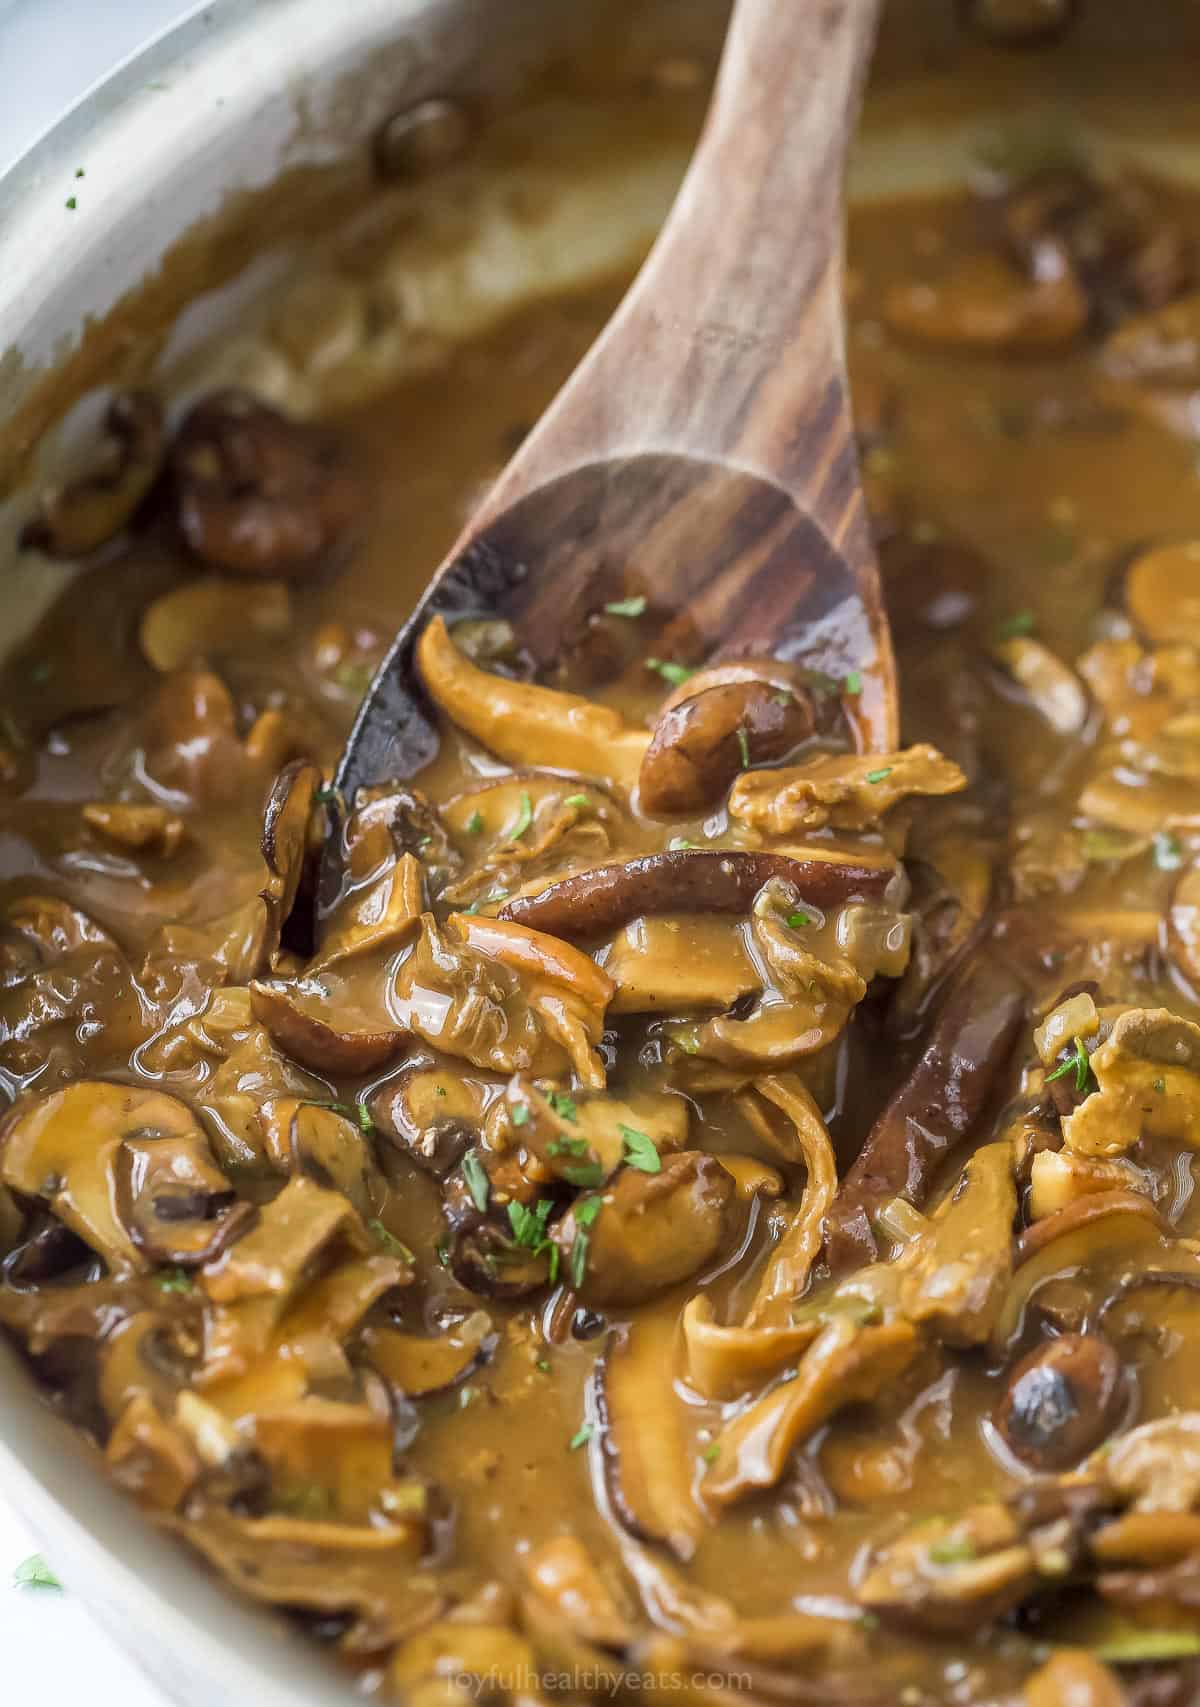 A wooden spoon digging into a pot of freshly-made mushroom gravy